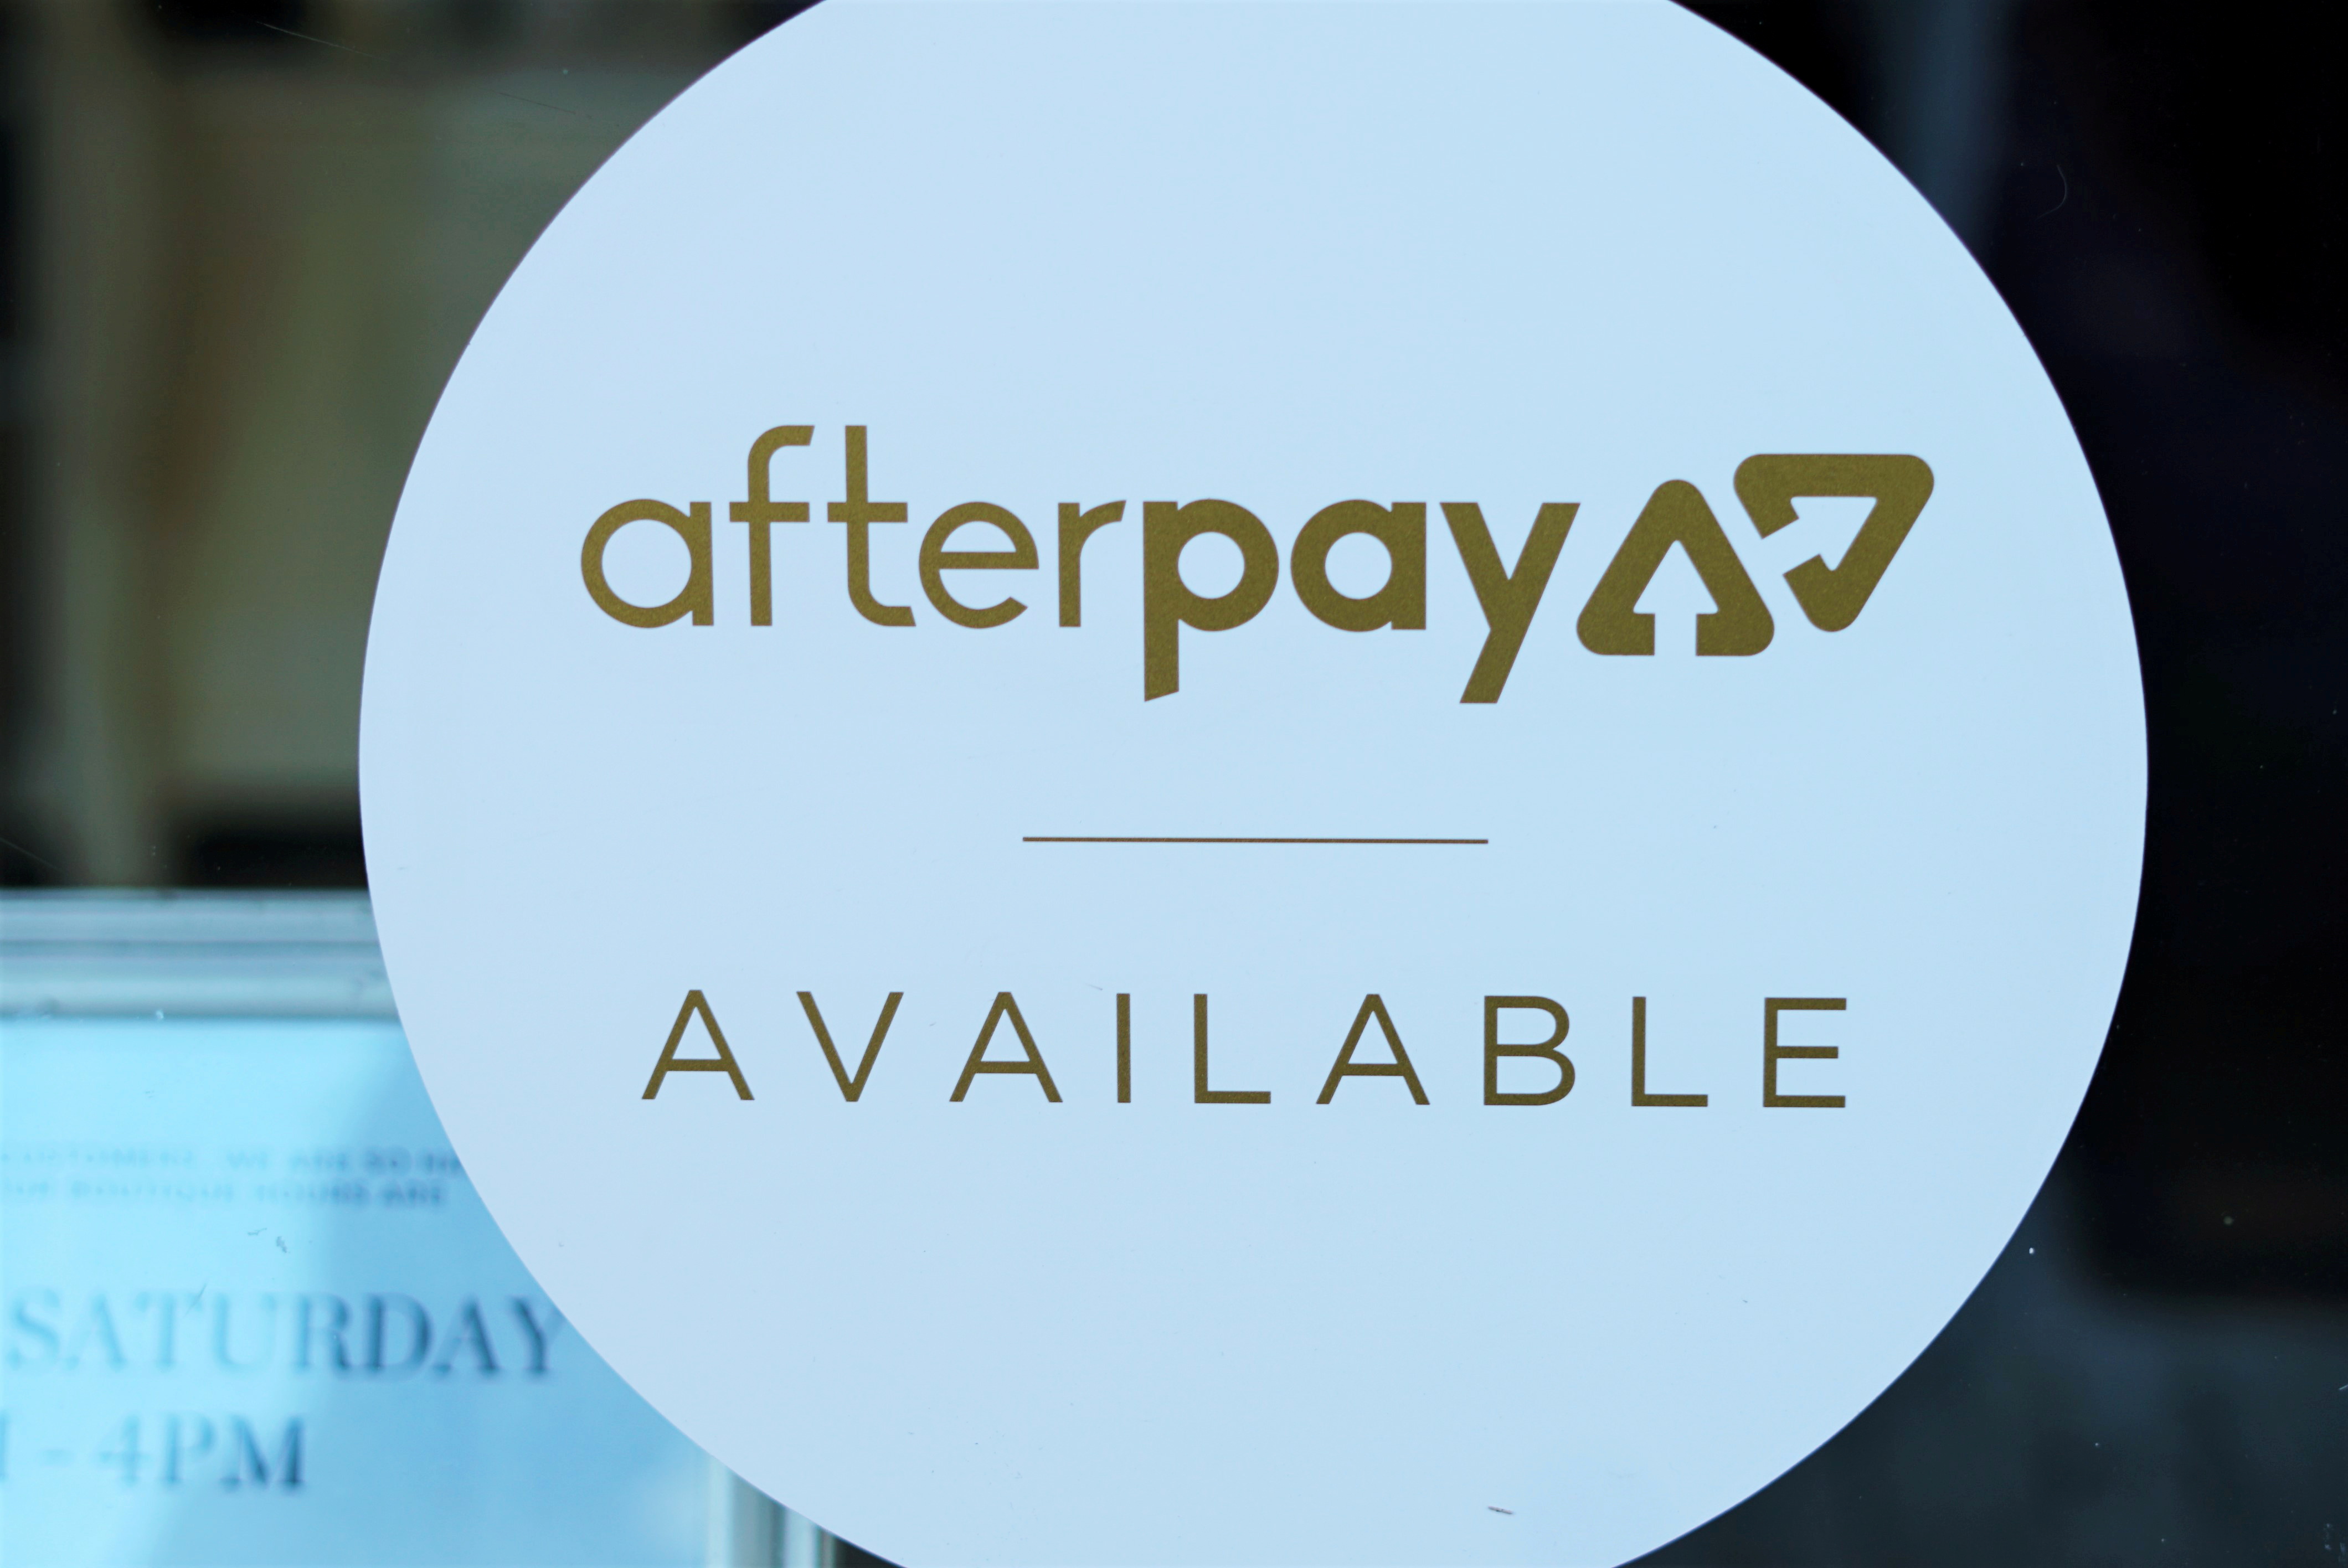 Square to buy 'buy now, pay later' giant Afterpay in $29B deal